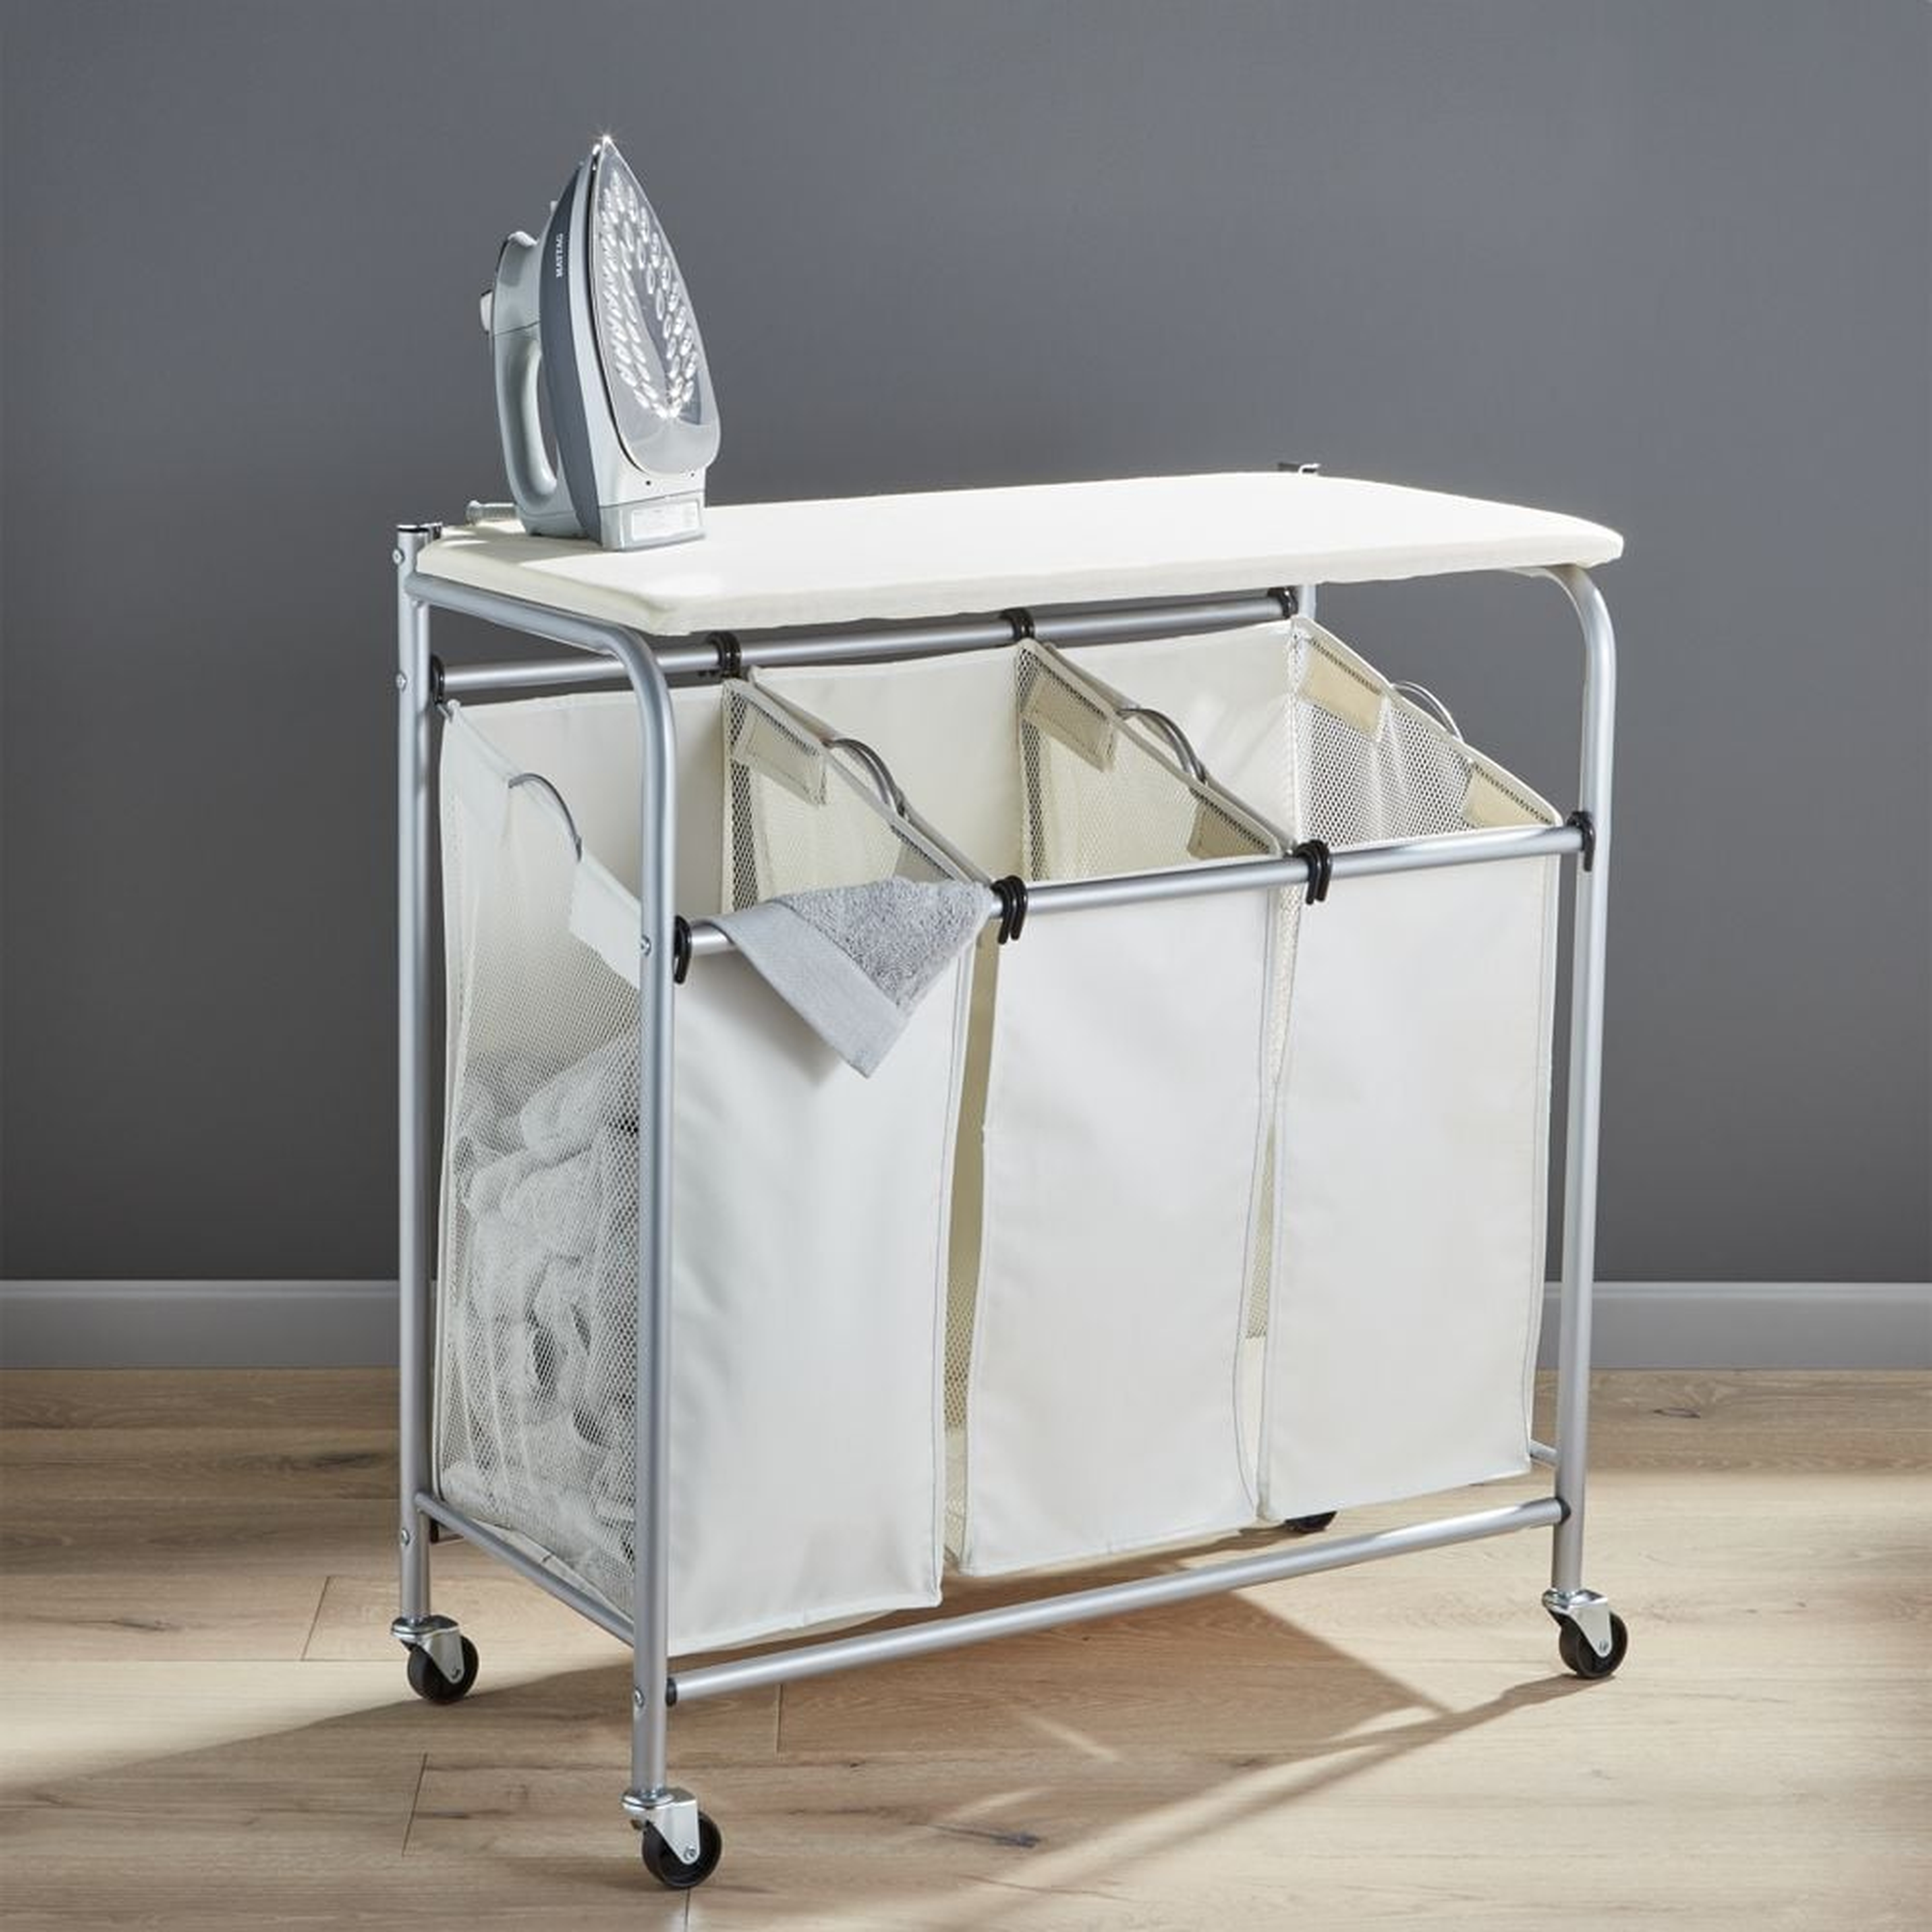 Triple Laundry Sorter with Ironing Board - Crate and Barrel